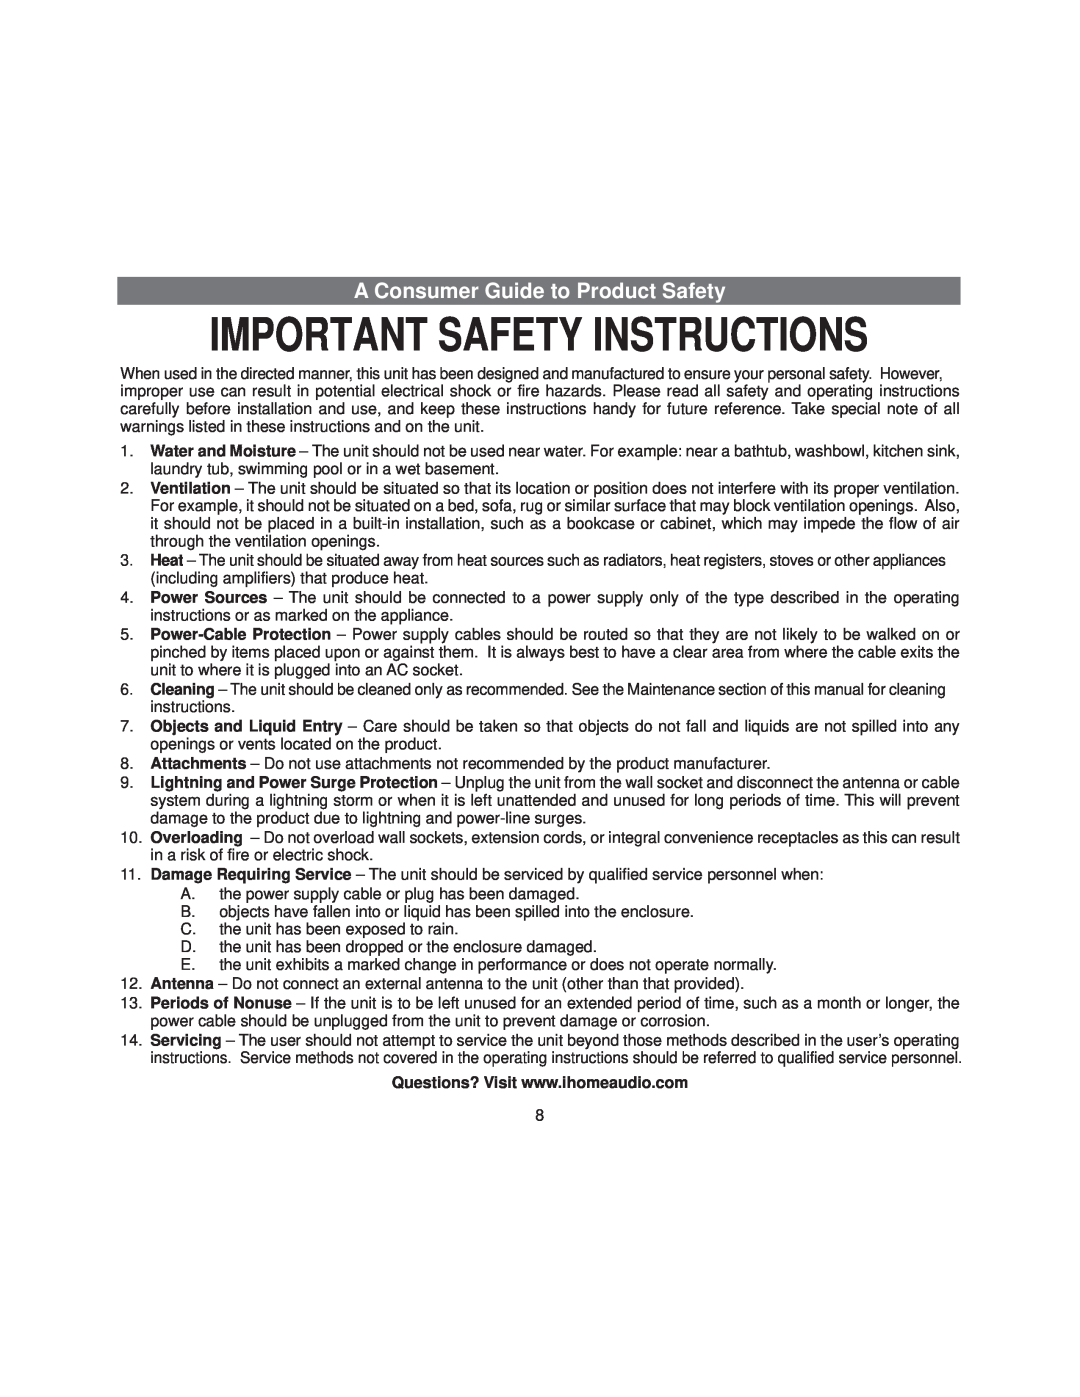 iHome ID91BZC manual Important Safety Instructions, A Consumer Guide to Product Safety 